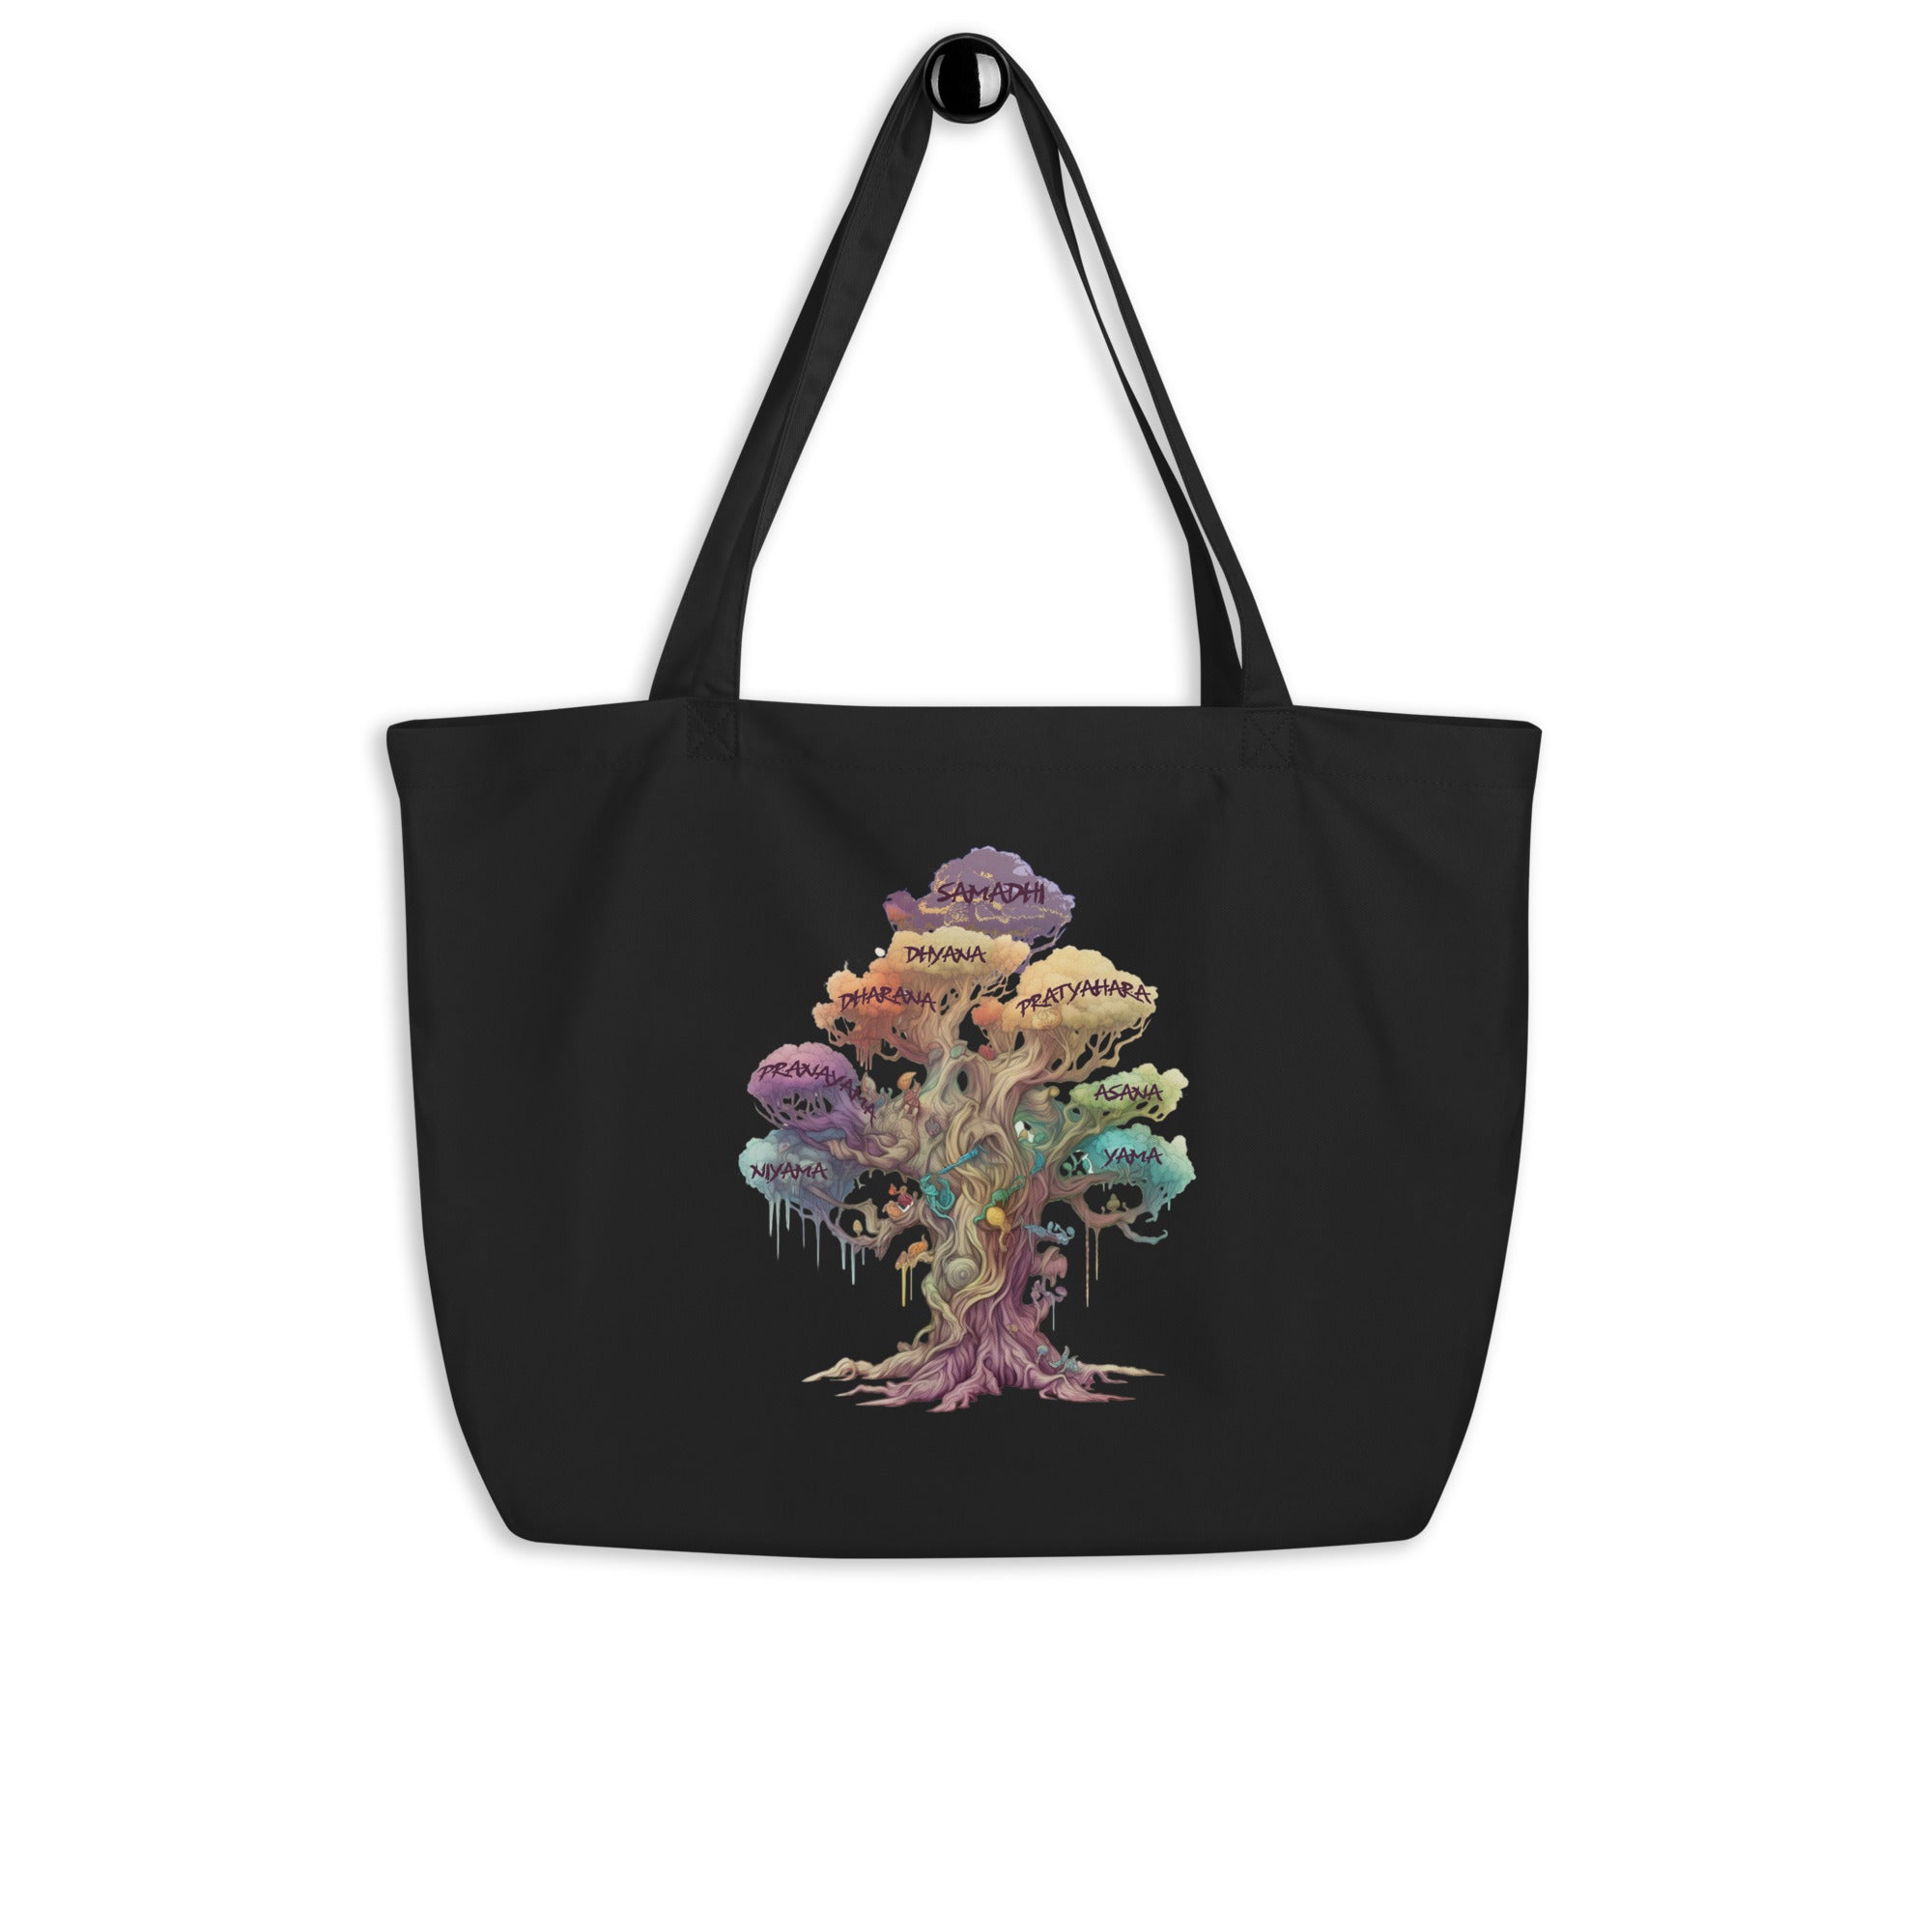 Patanjali's Eight Limbs of Yoga Large organic tote bag by IndiOdyssey